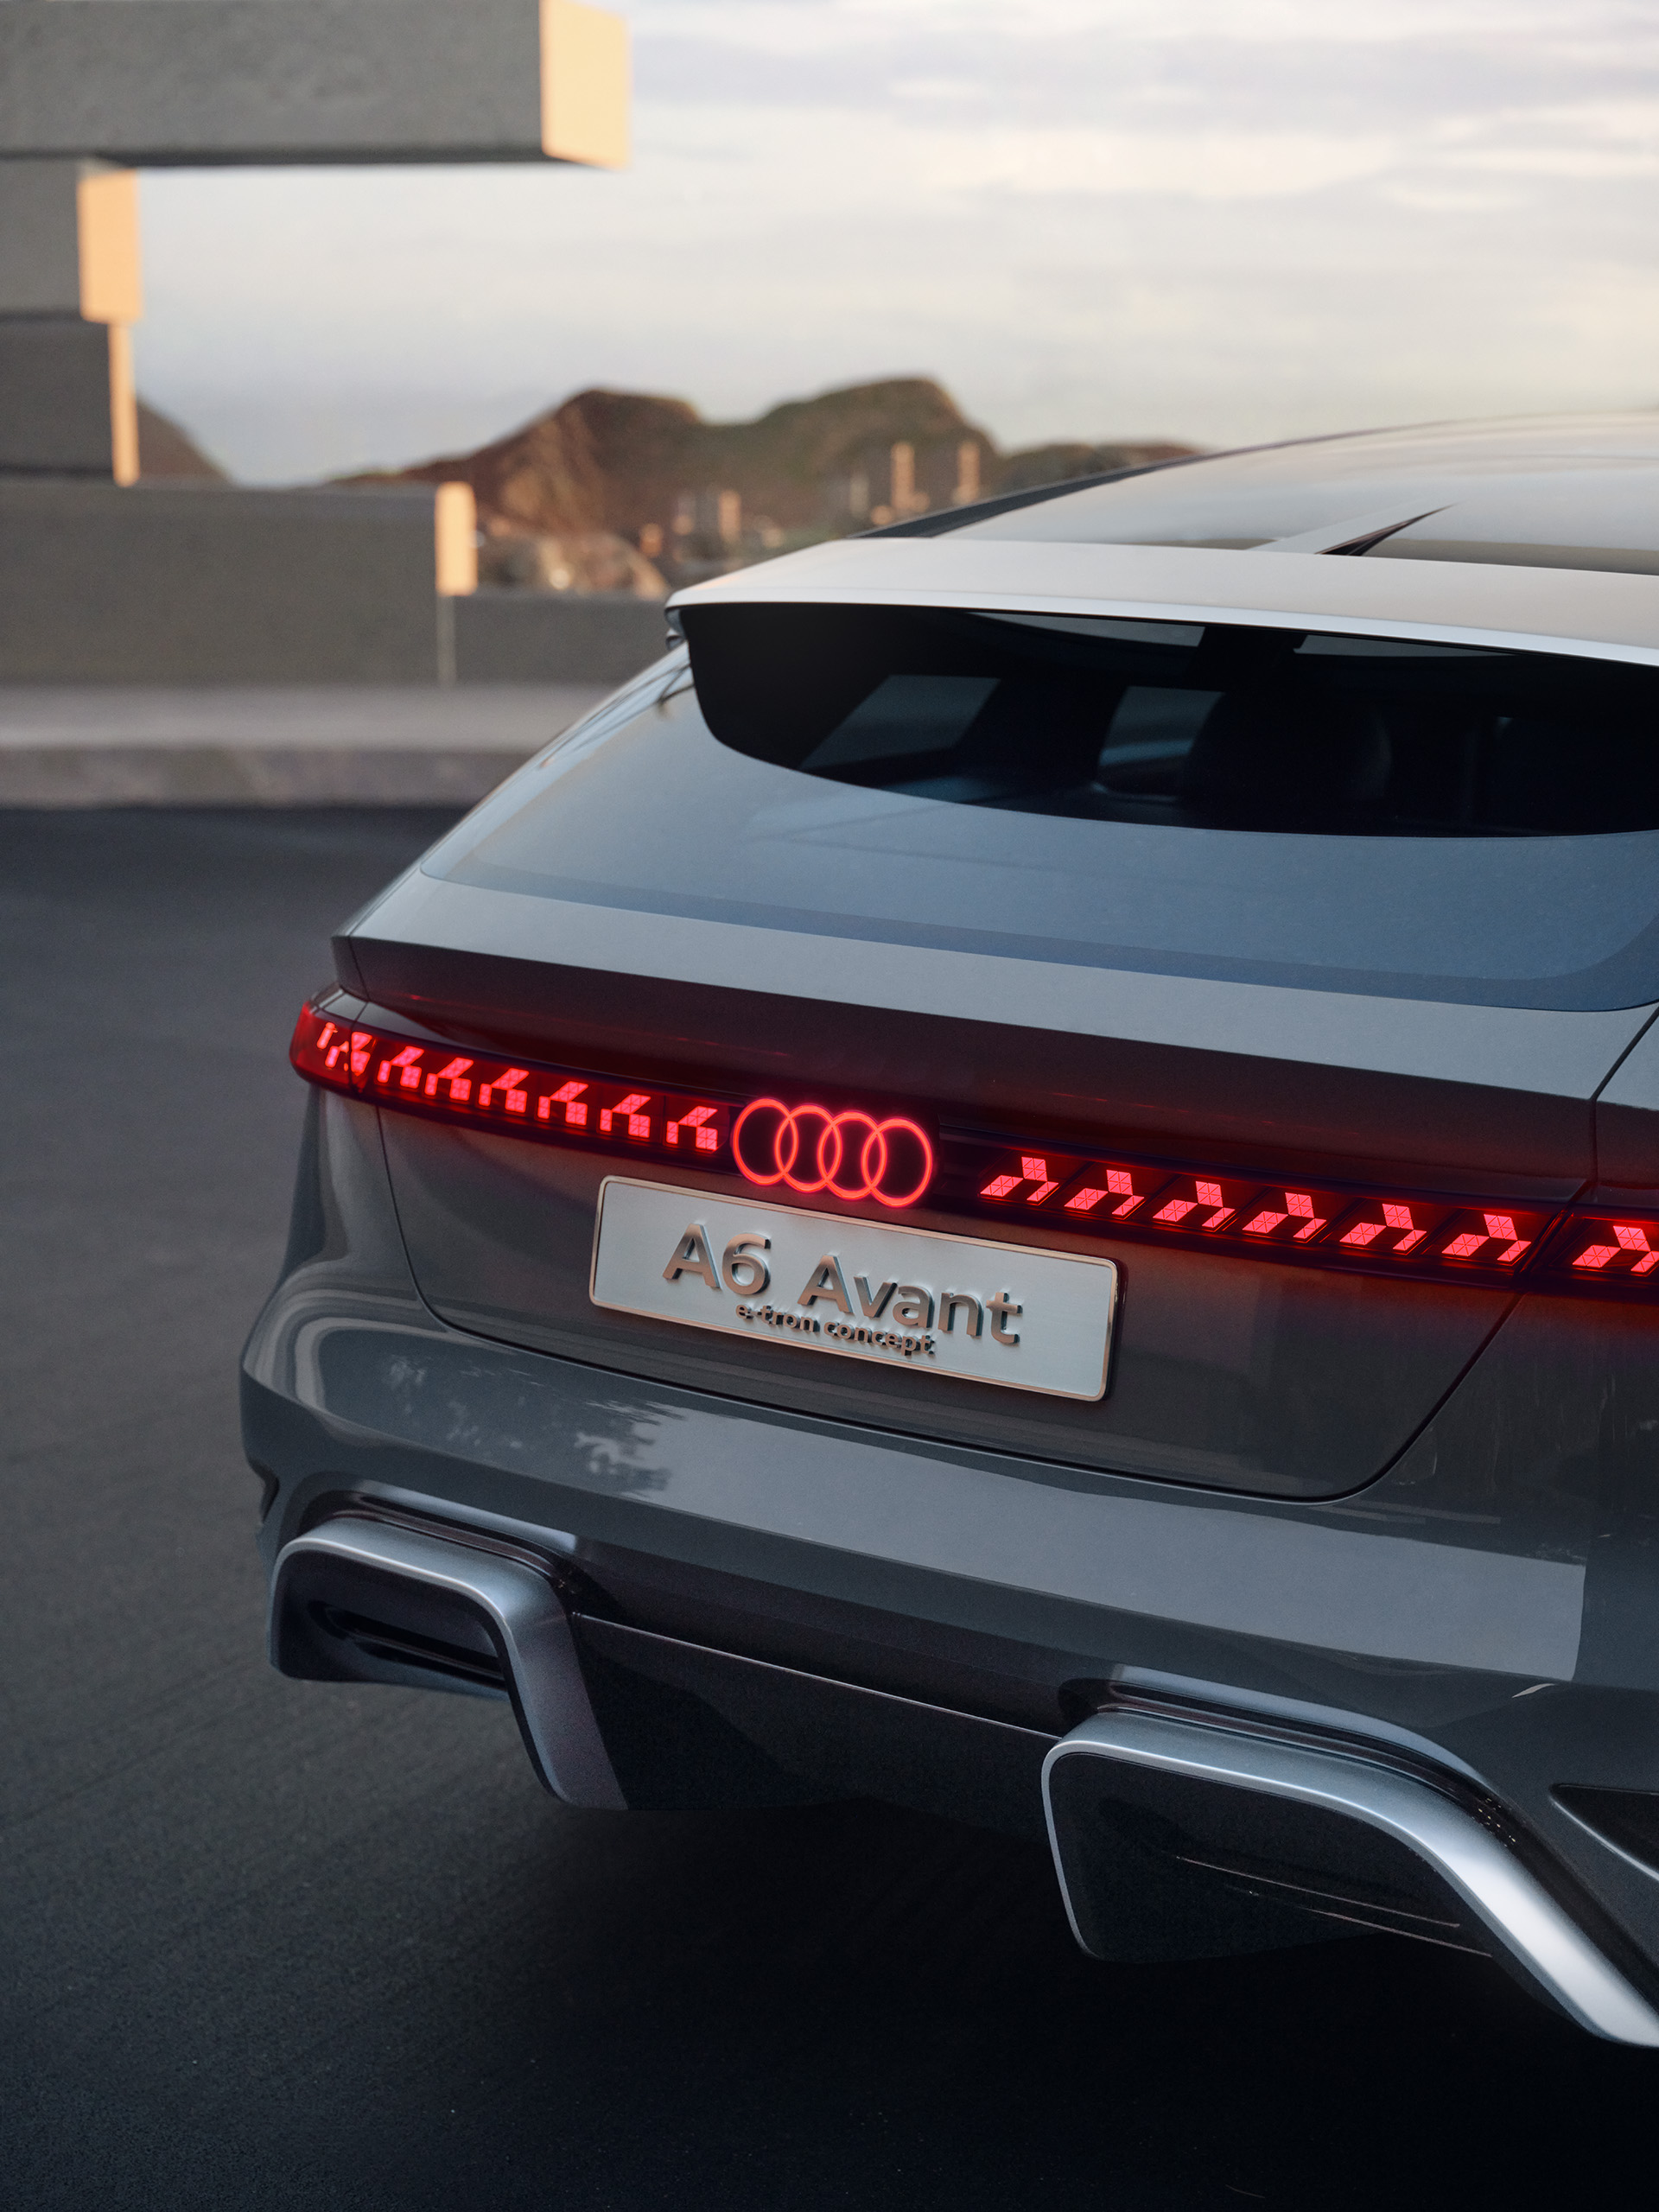 A rear view of the Audi A6 Avant e-tron concept with the continuous light strip.